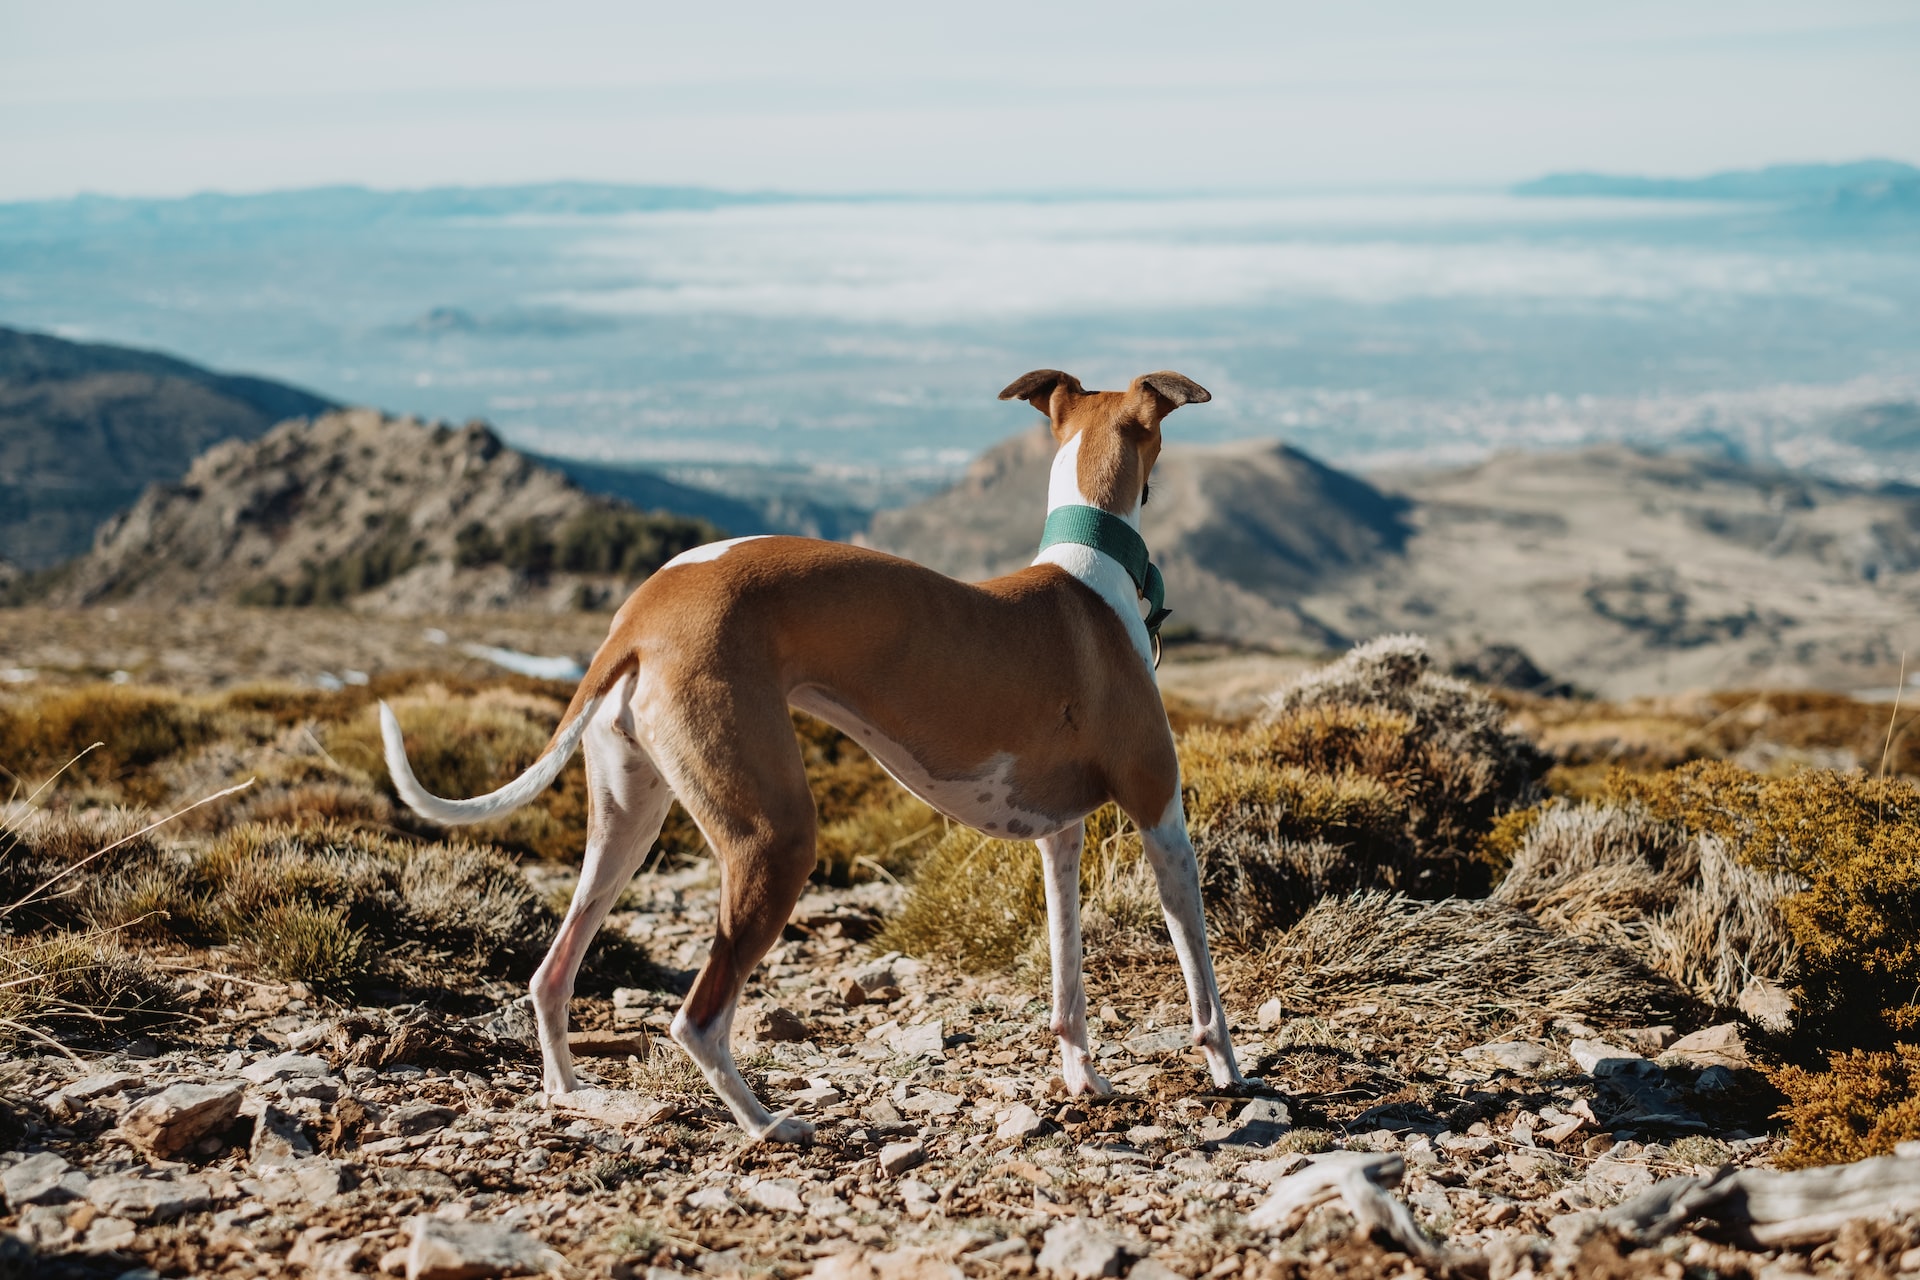 Whippet dog with a blue collar standing on a mountain overlooking the valley below